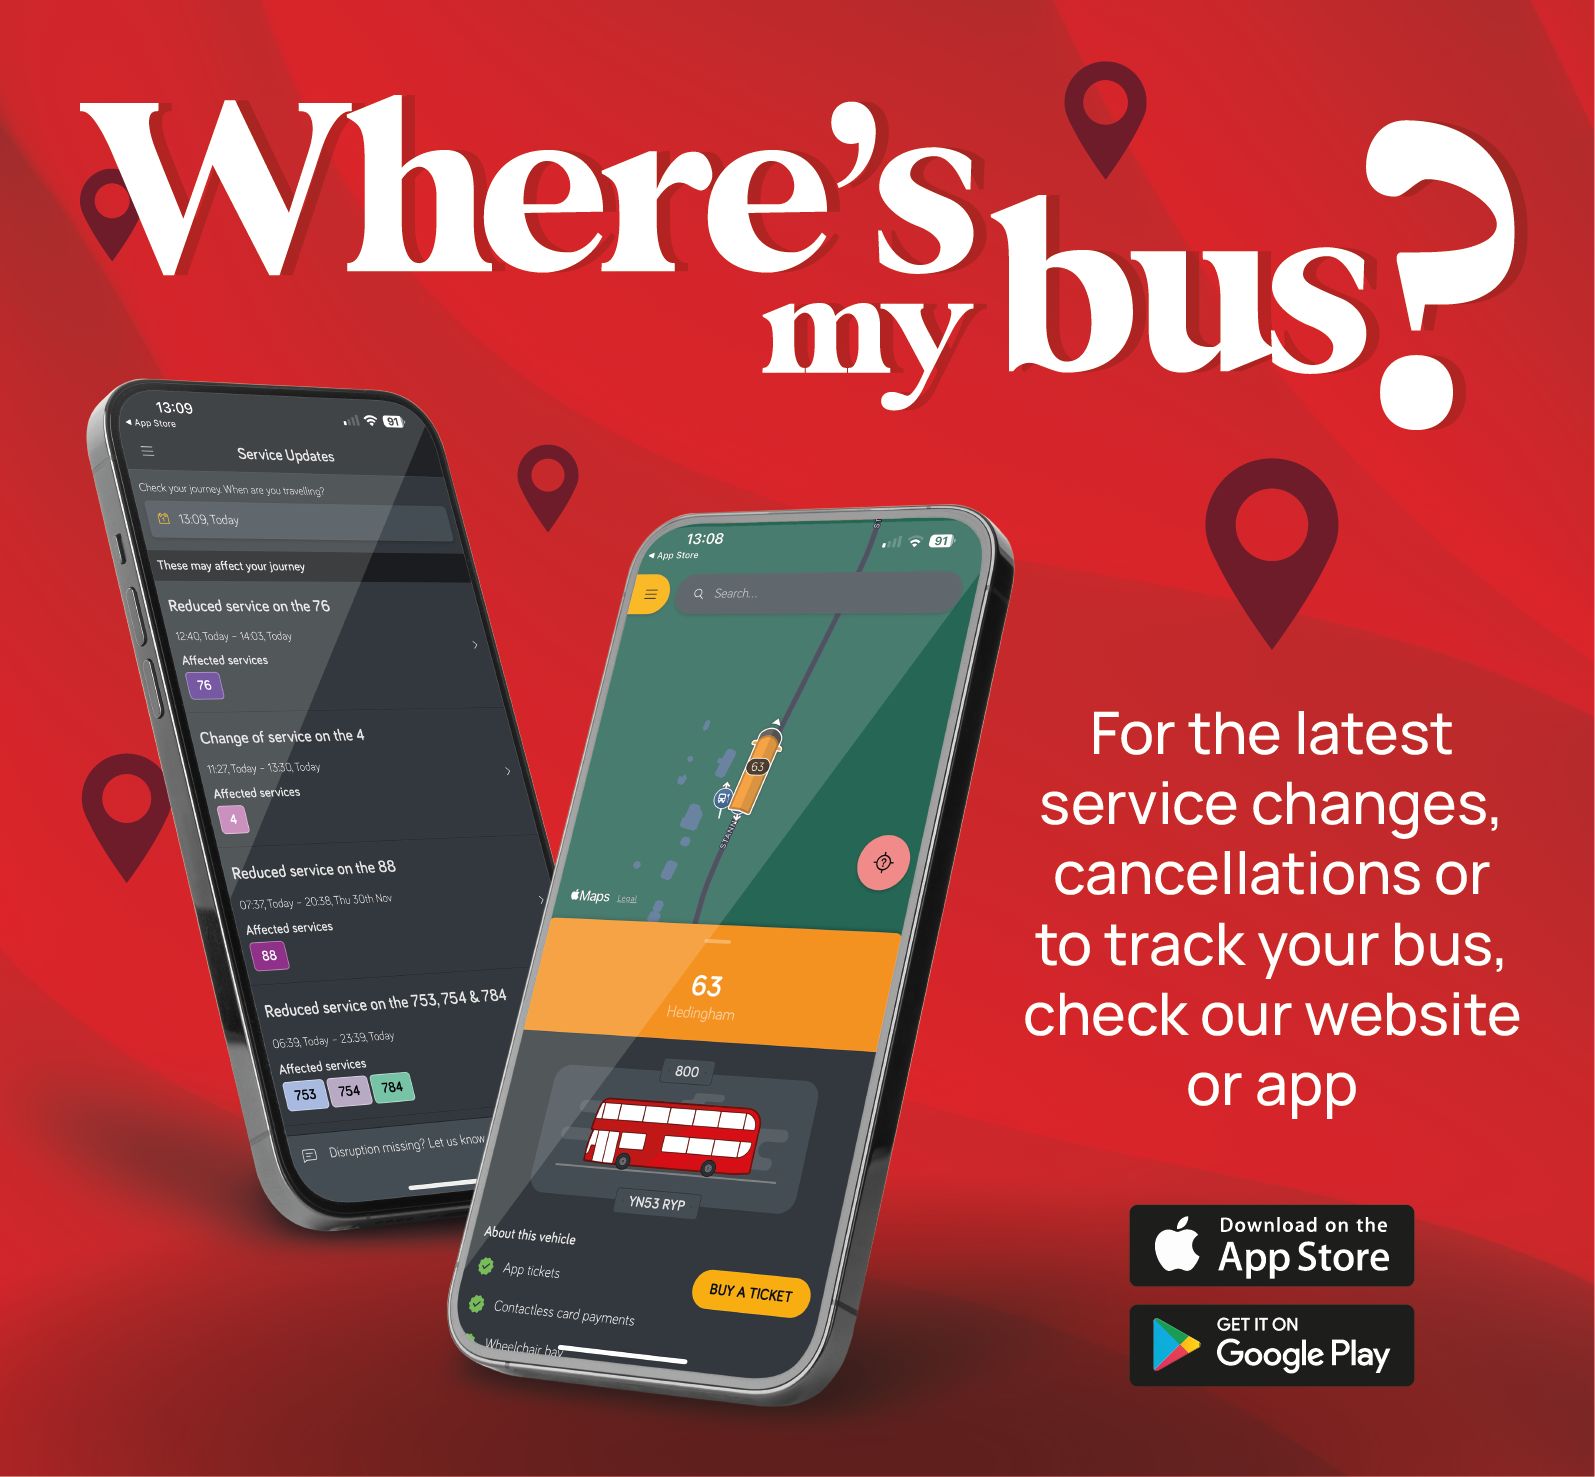 Where's my bus? - visit the app or website for latest information